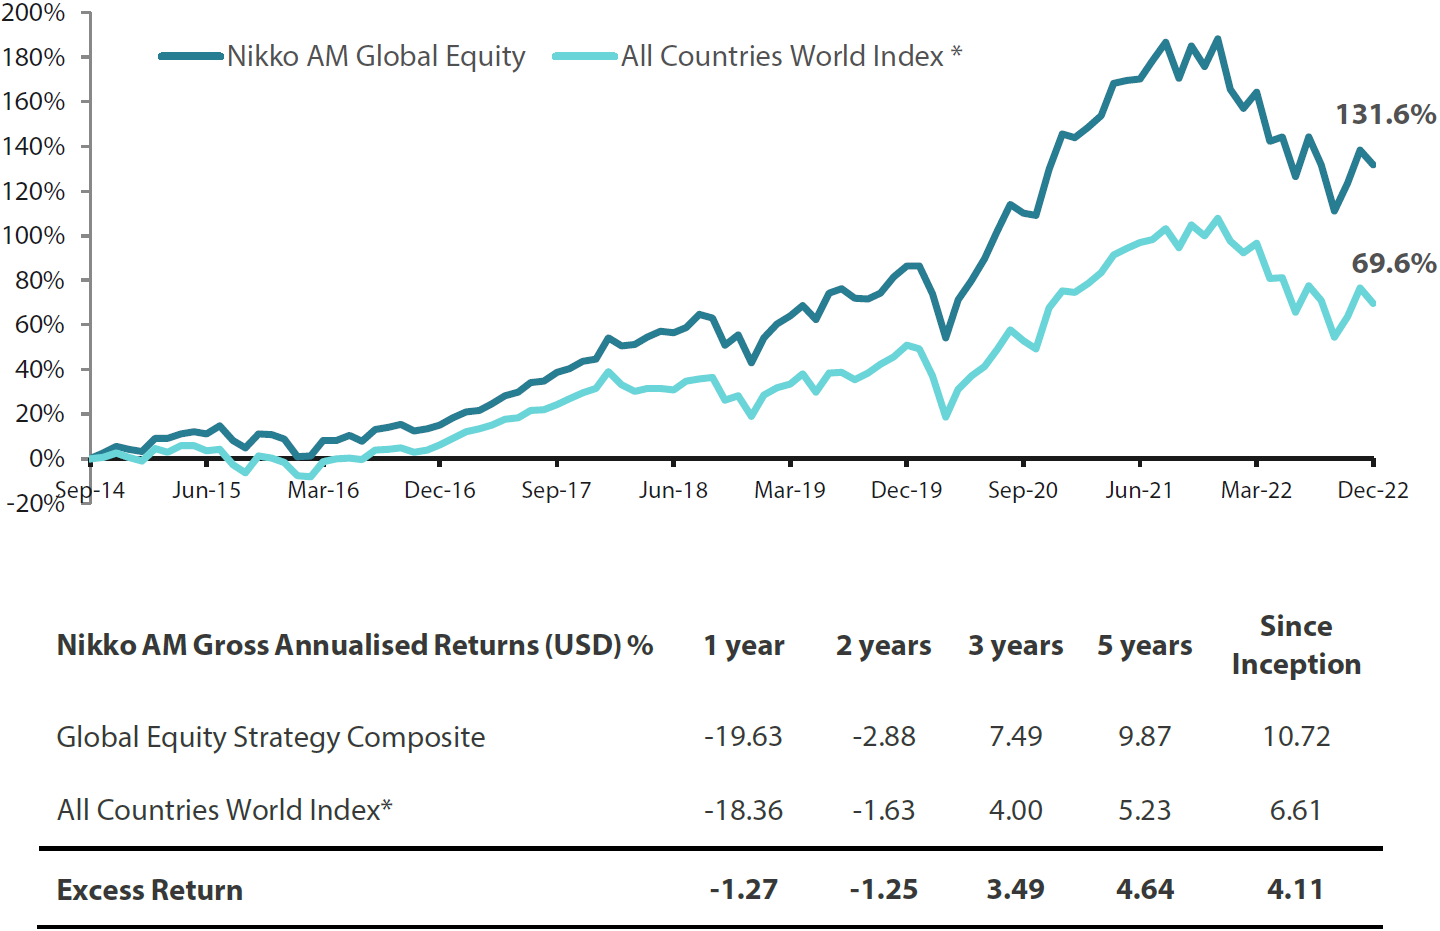 Global Equity Strategy Composite Performance to December 2022